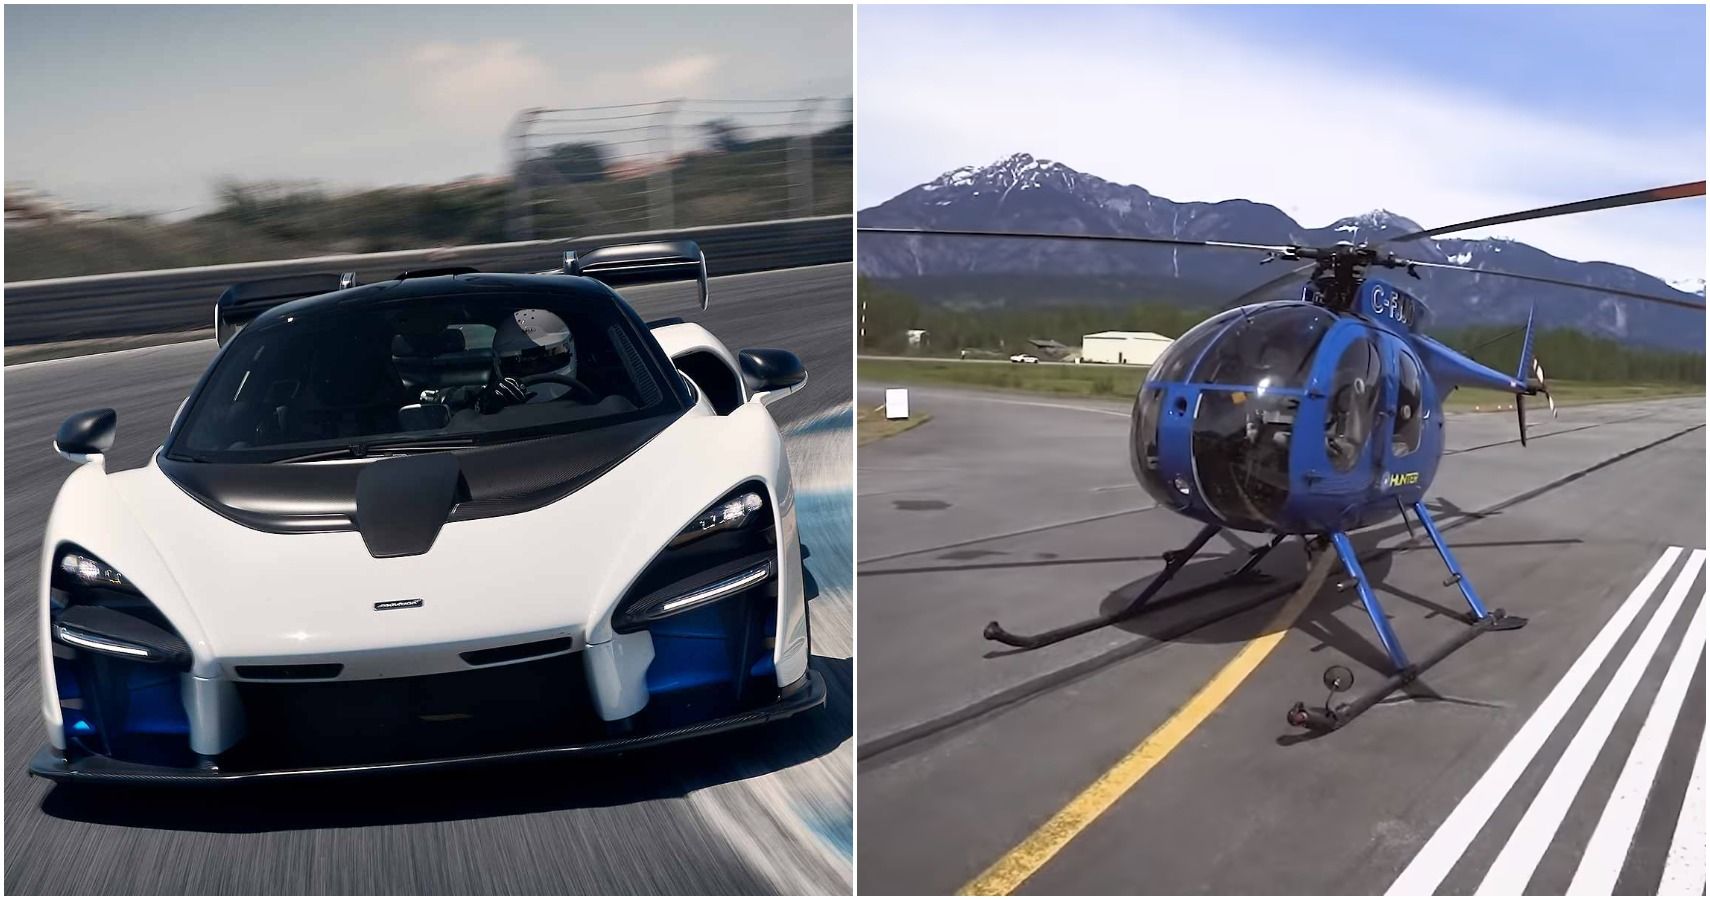 Watch A McLaren Senna Race A Helicopter In Highly Unorthodox Drag Race